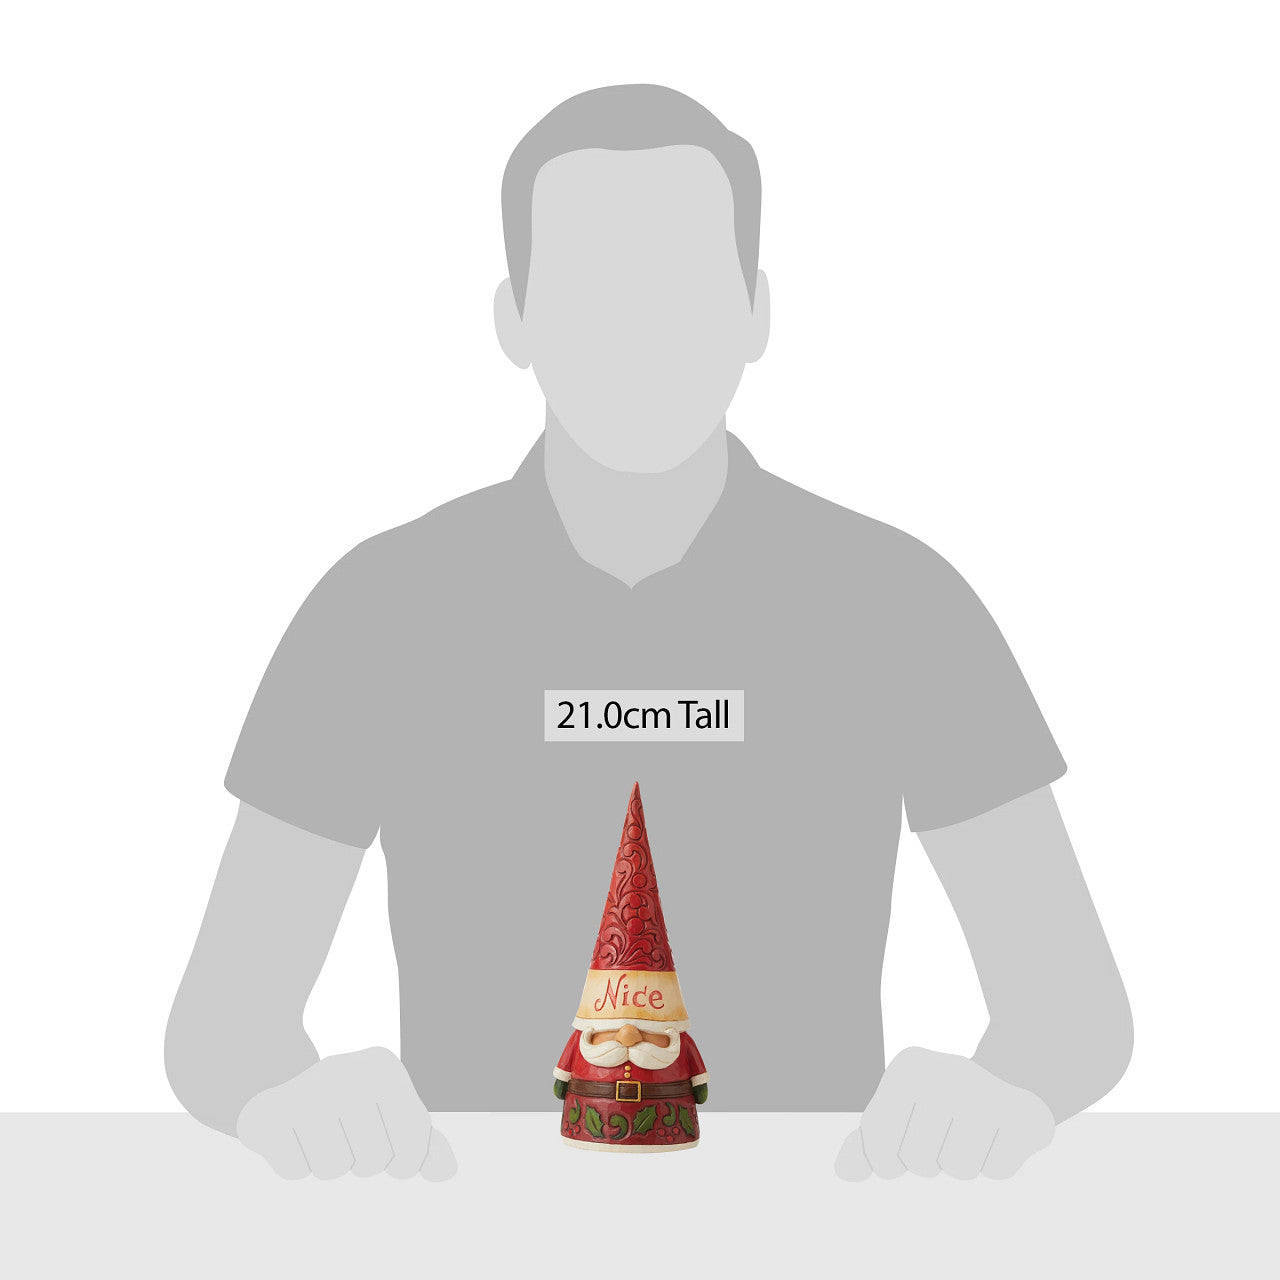 Gnome-body's Perfect - Two-Sided Naughty And Nice Gnome Figurine